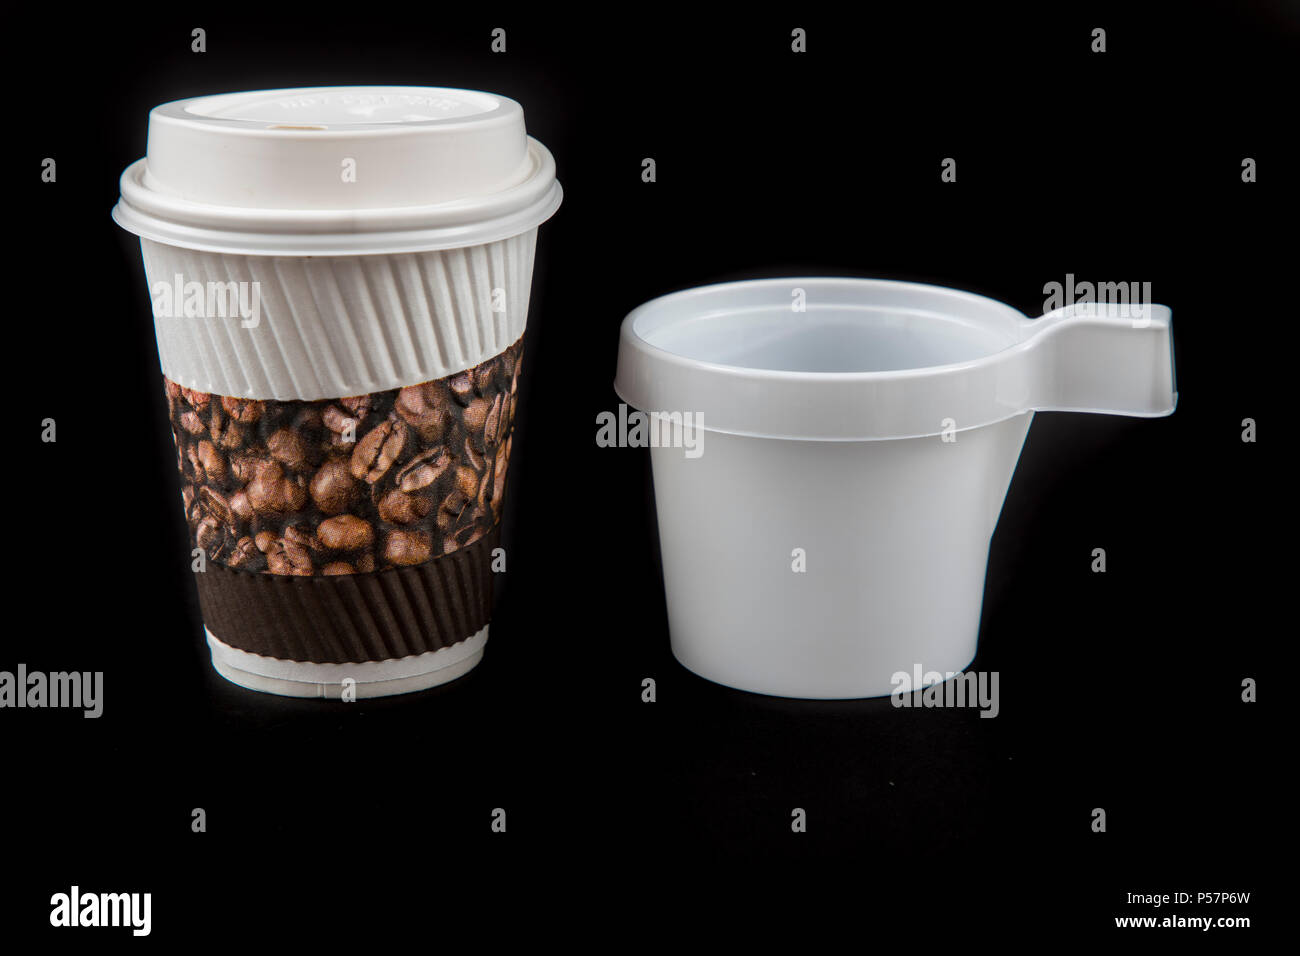 Coffee to go cup, plastic, waste, Stock Photo